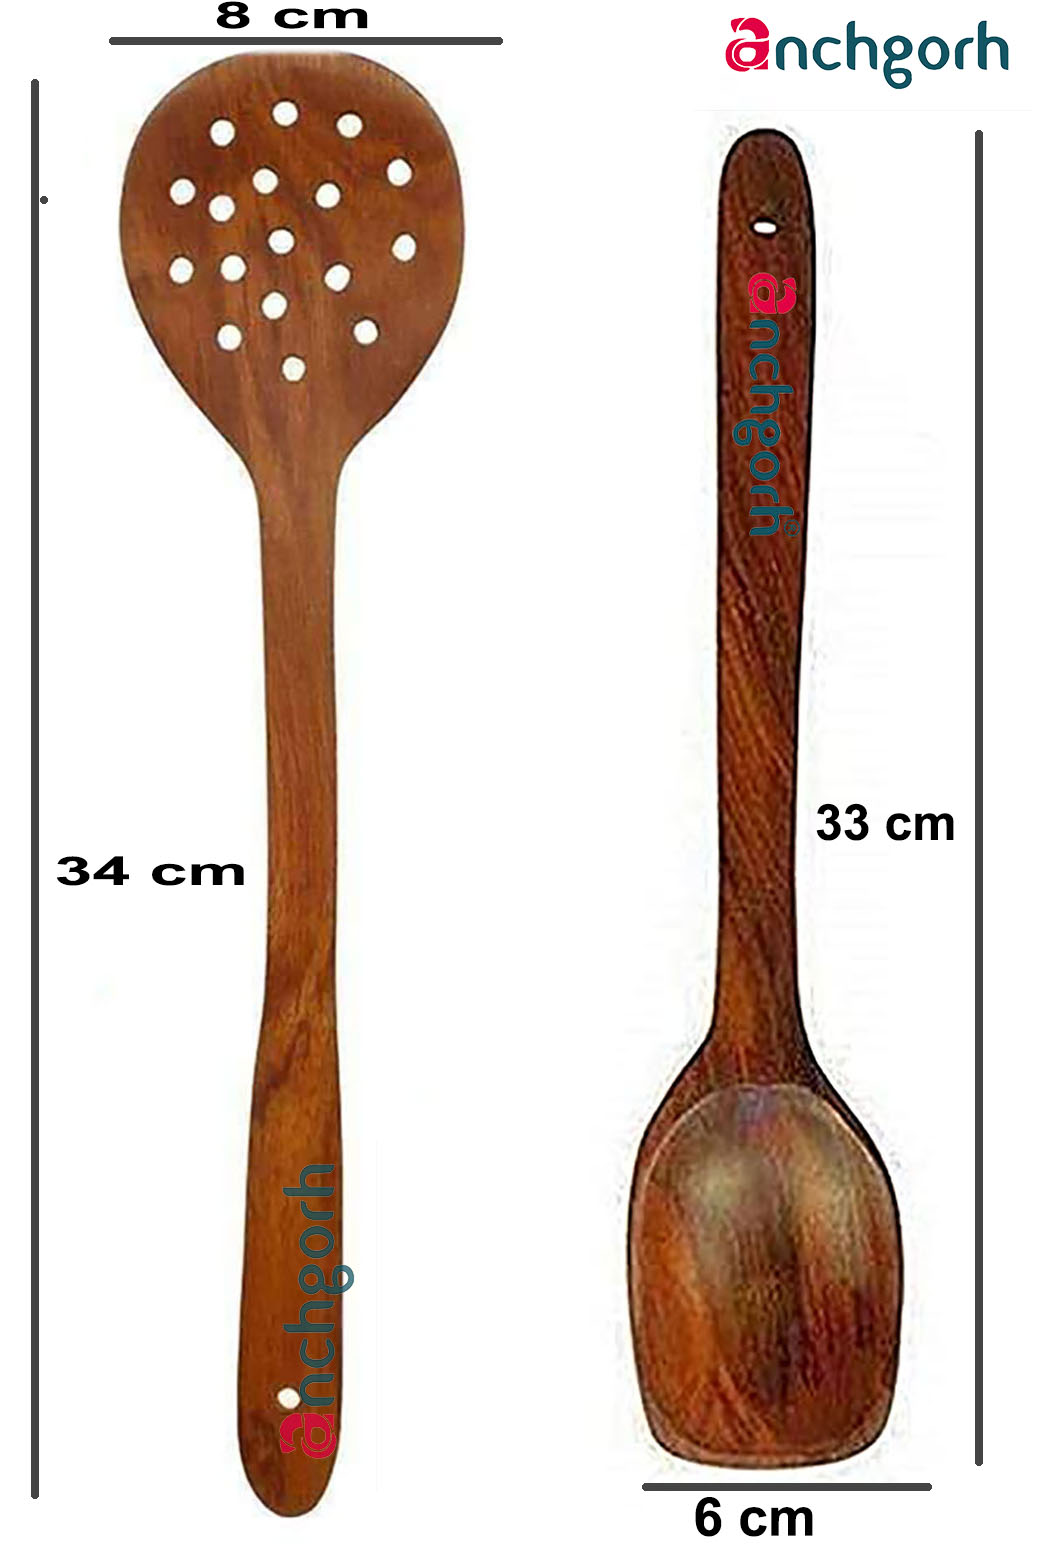 Anchgorh® Sheesham Wooden Spoon Set | Spatula Set | Cutlery Set from Anchgorh